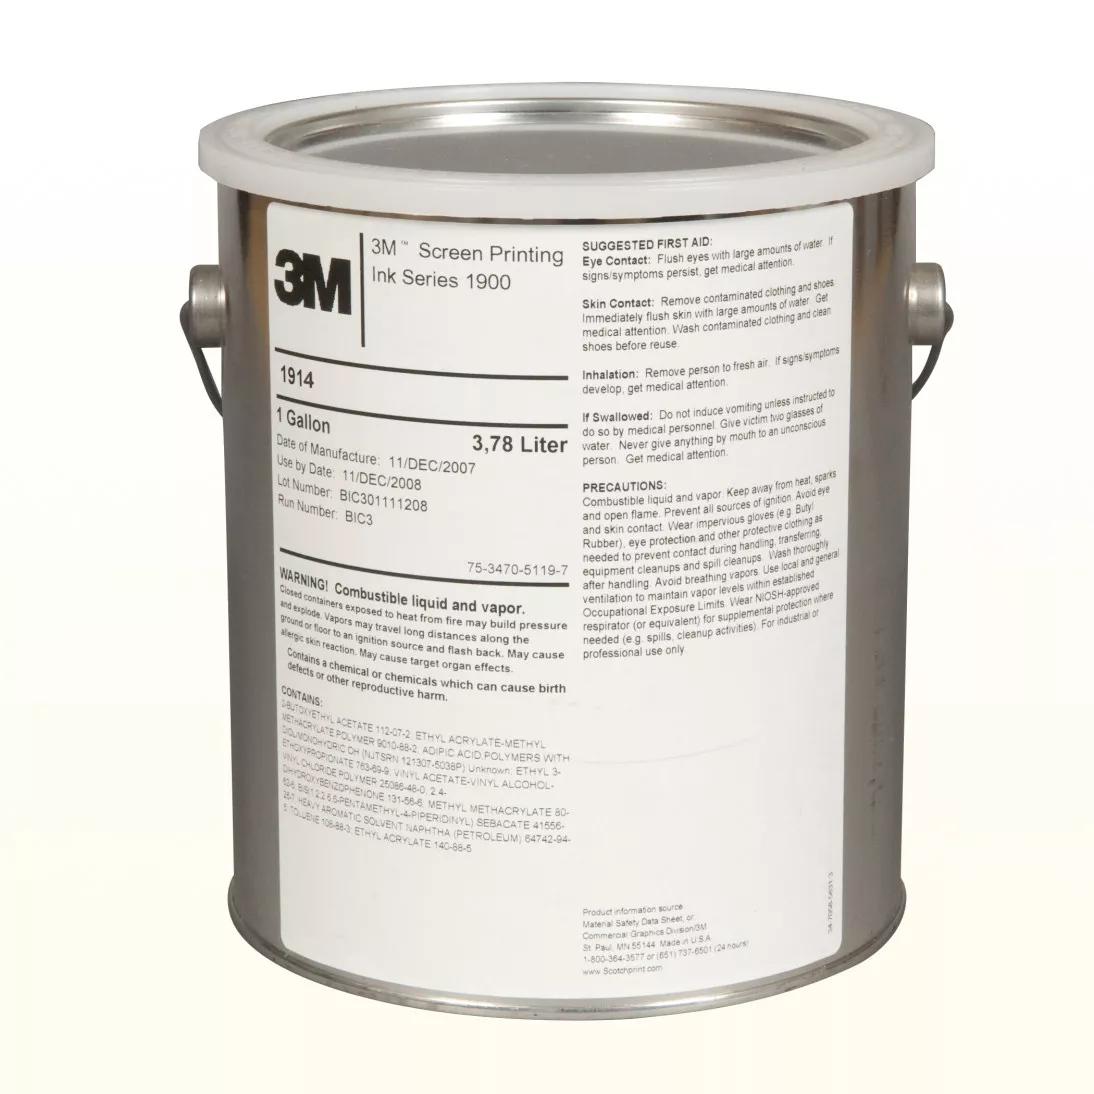 3M™ Screen Printing Ink 1914, Dark Green, 1 Gallon Container